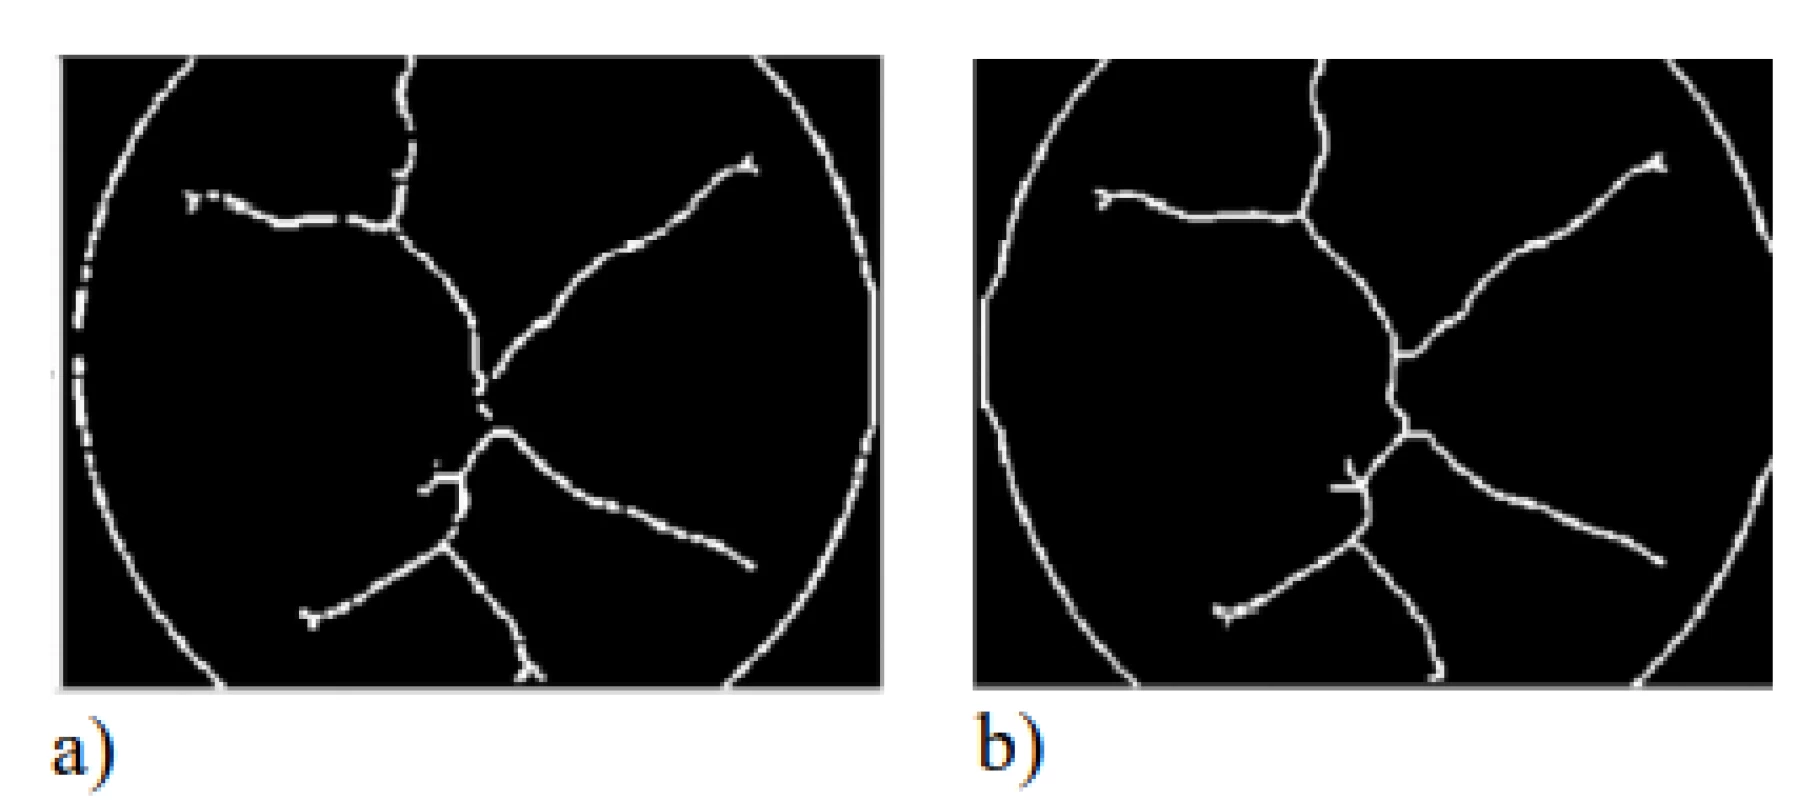 Steps of segmentation algorithm for simplification object (left), for filling holes in images (right).